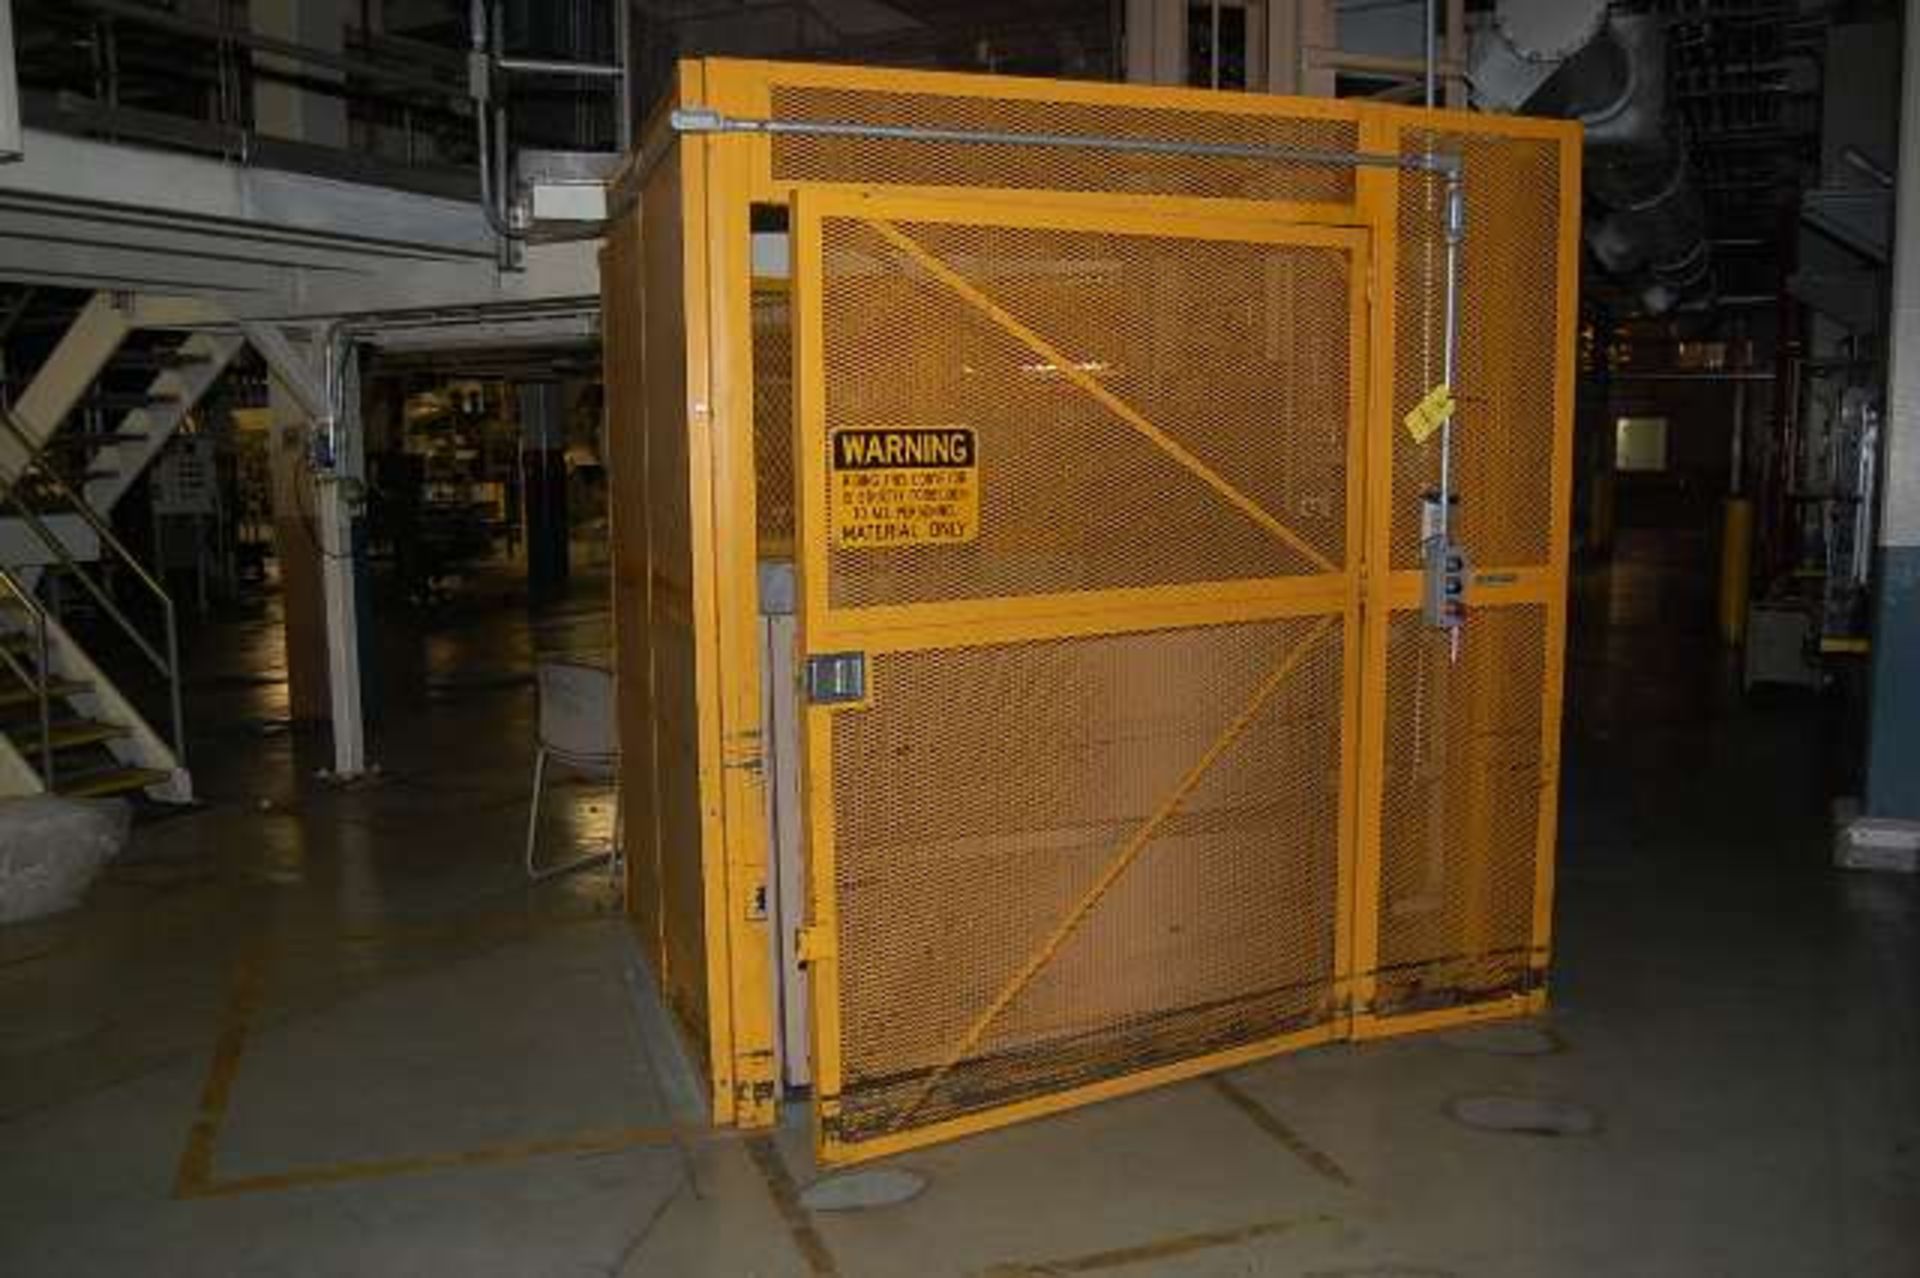 Langley Hydraulic Lift, 60 in. x 58 in. Platform, Approx. 8 ft. Lift Ht., Safety Guard w/Door